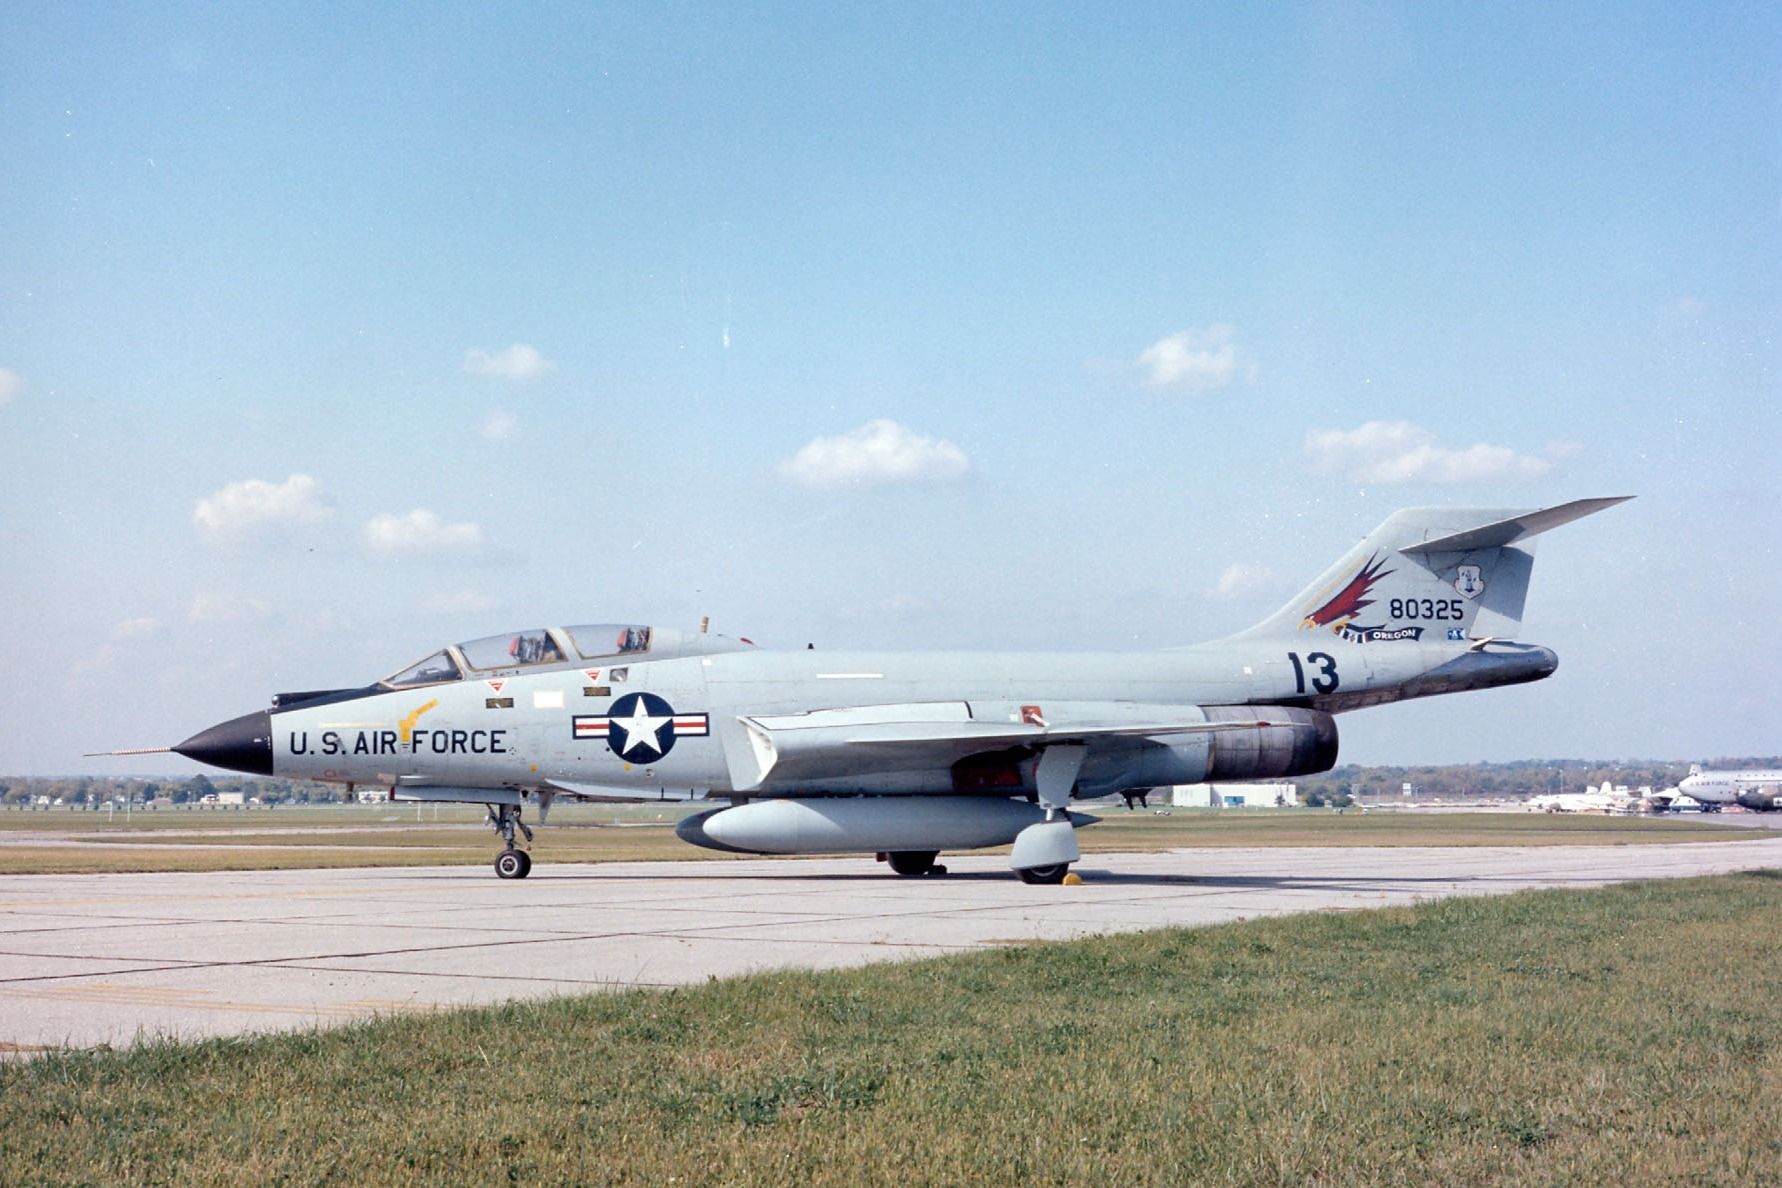 A McDonnell F-101B Voodoo on an airfield apron.